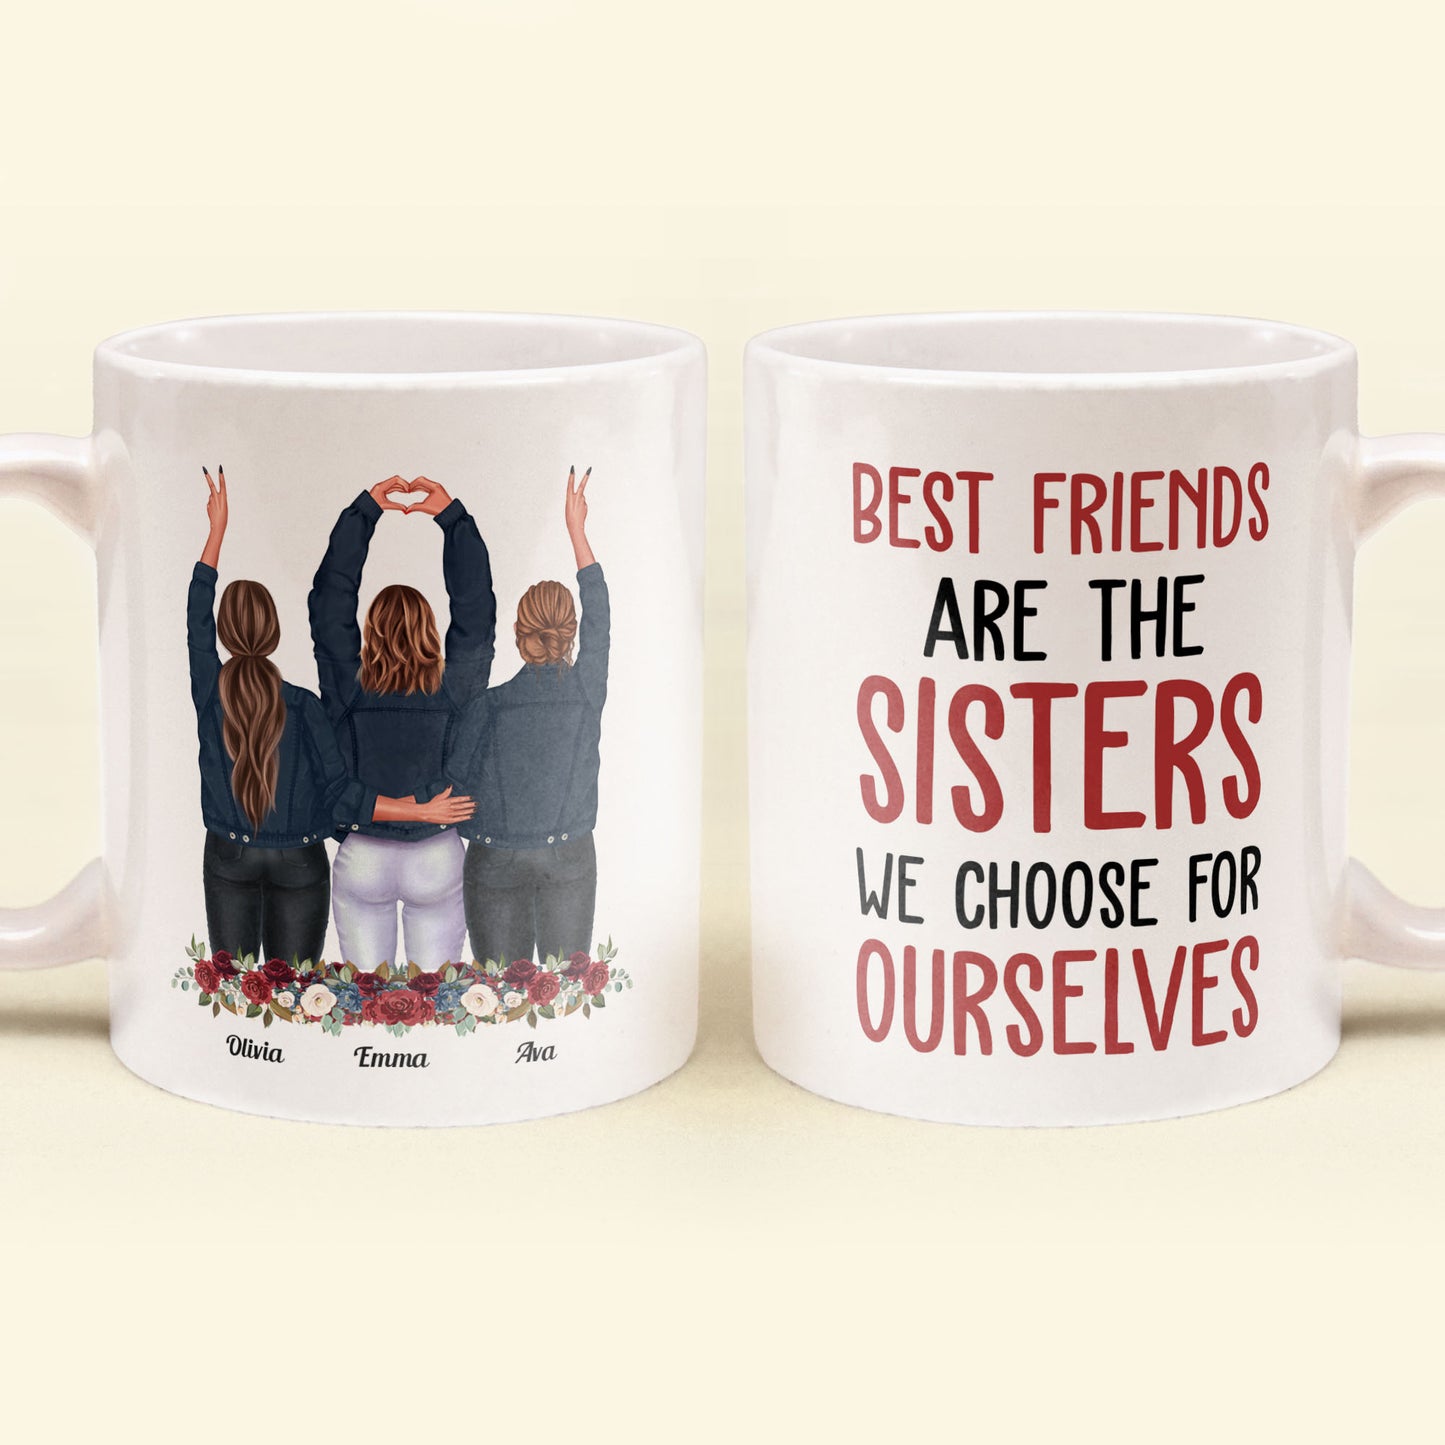 Best Friends Are The Sisters We Choose For Ourselves - Personalized Mug - Birthday, Christmas Gift For Her, Friends, BFF, Besties, Best Friends, Soul Sisters